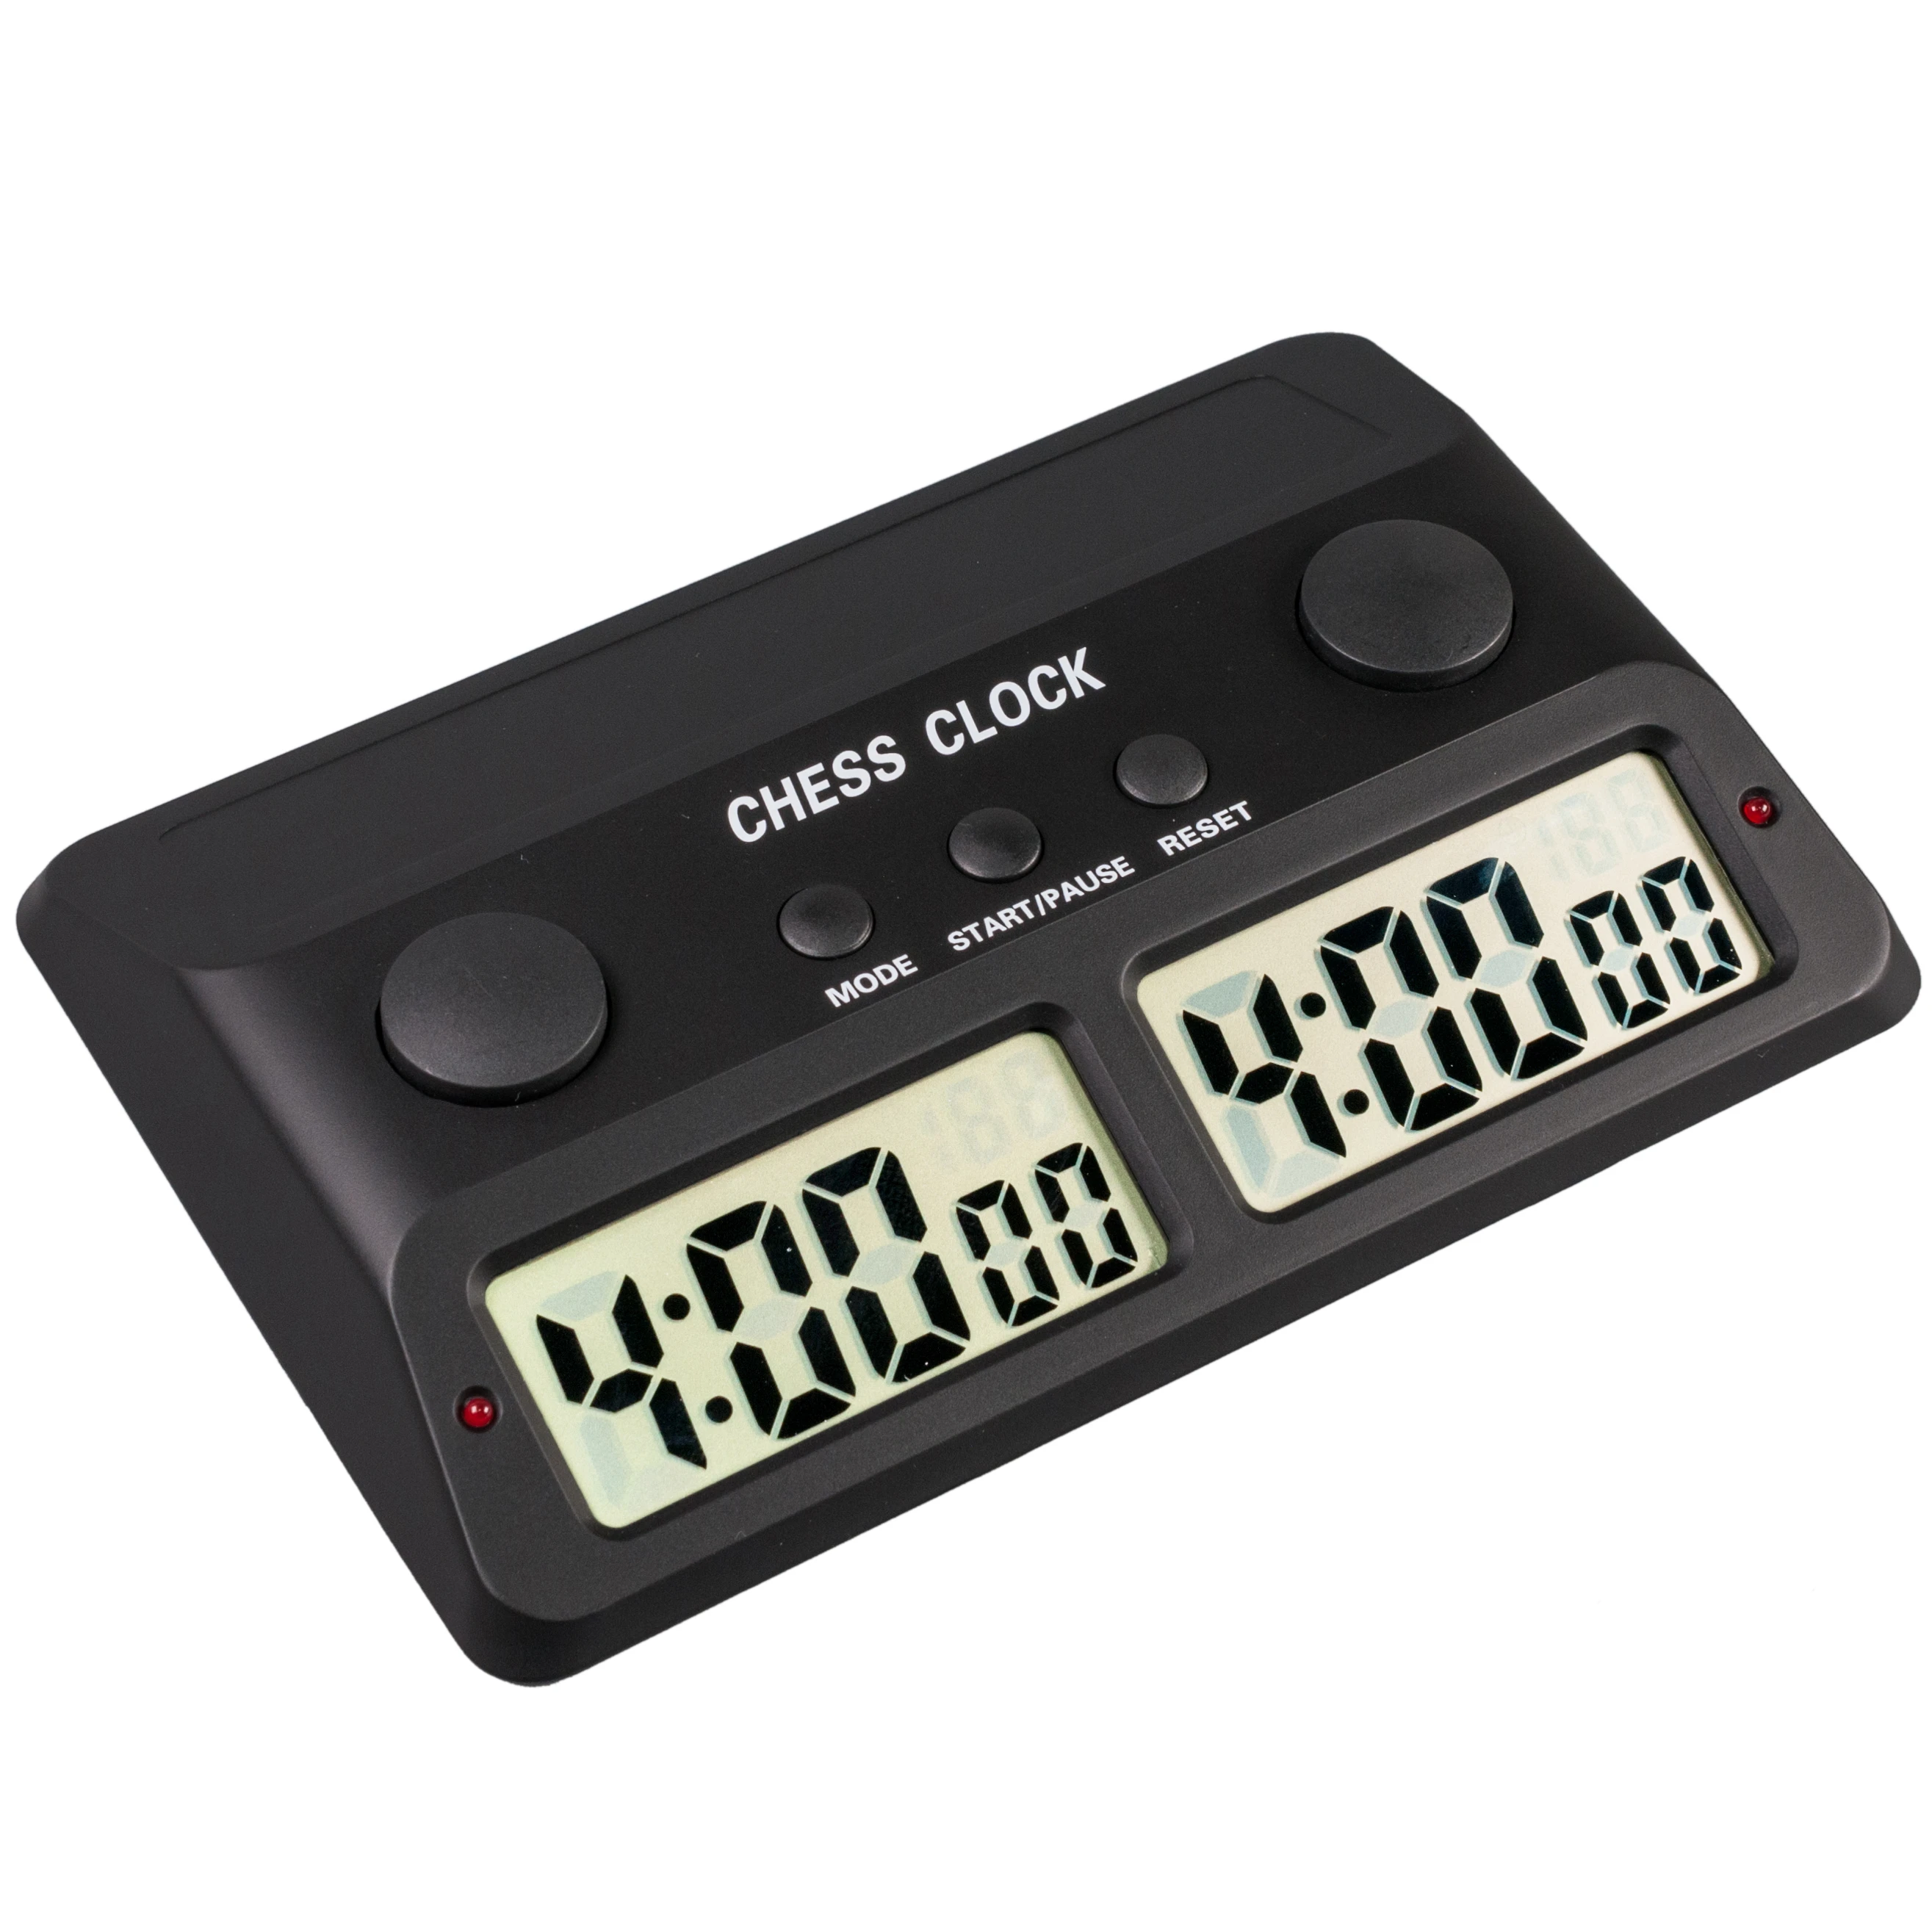 

Good Quality Intelligent Clock International Chess the Game of Go Chess Game Timer, Black